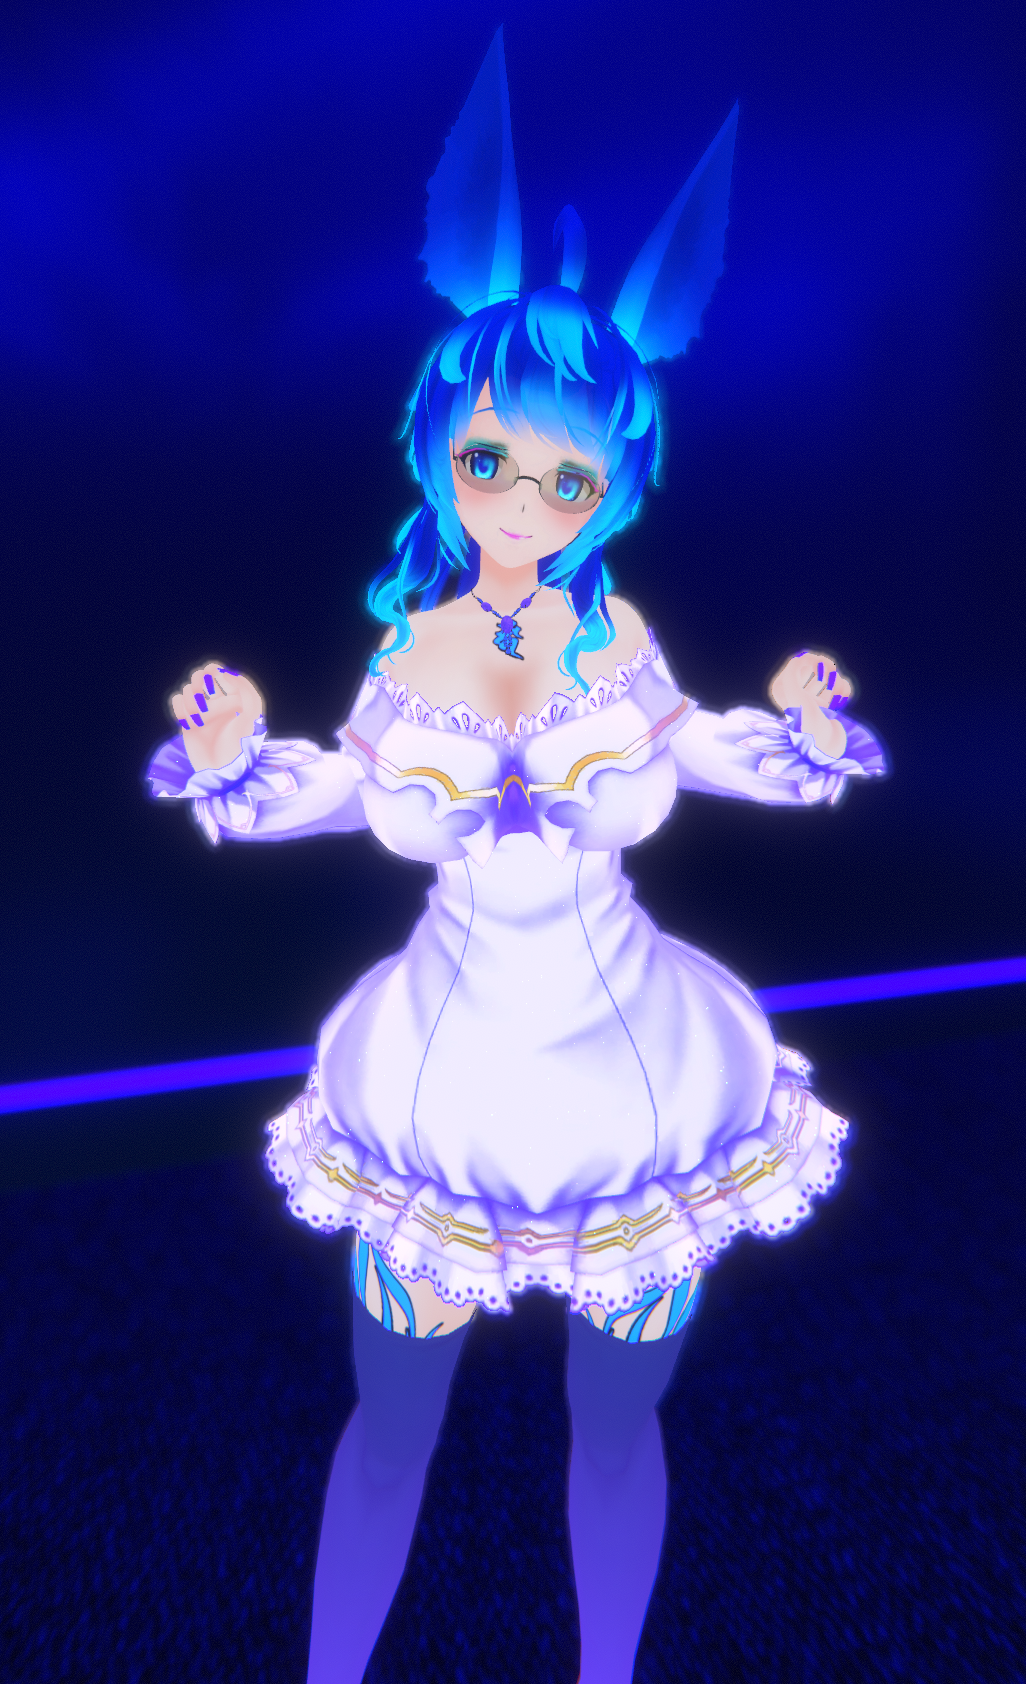 Staying in to go out: exploring the VRChat club scene